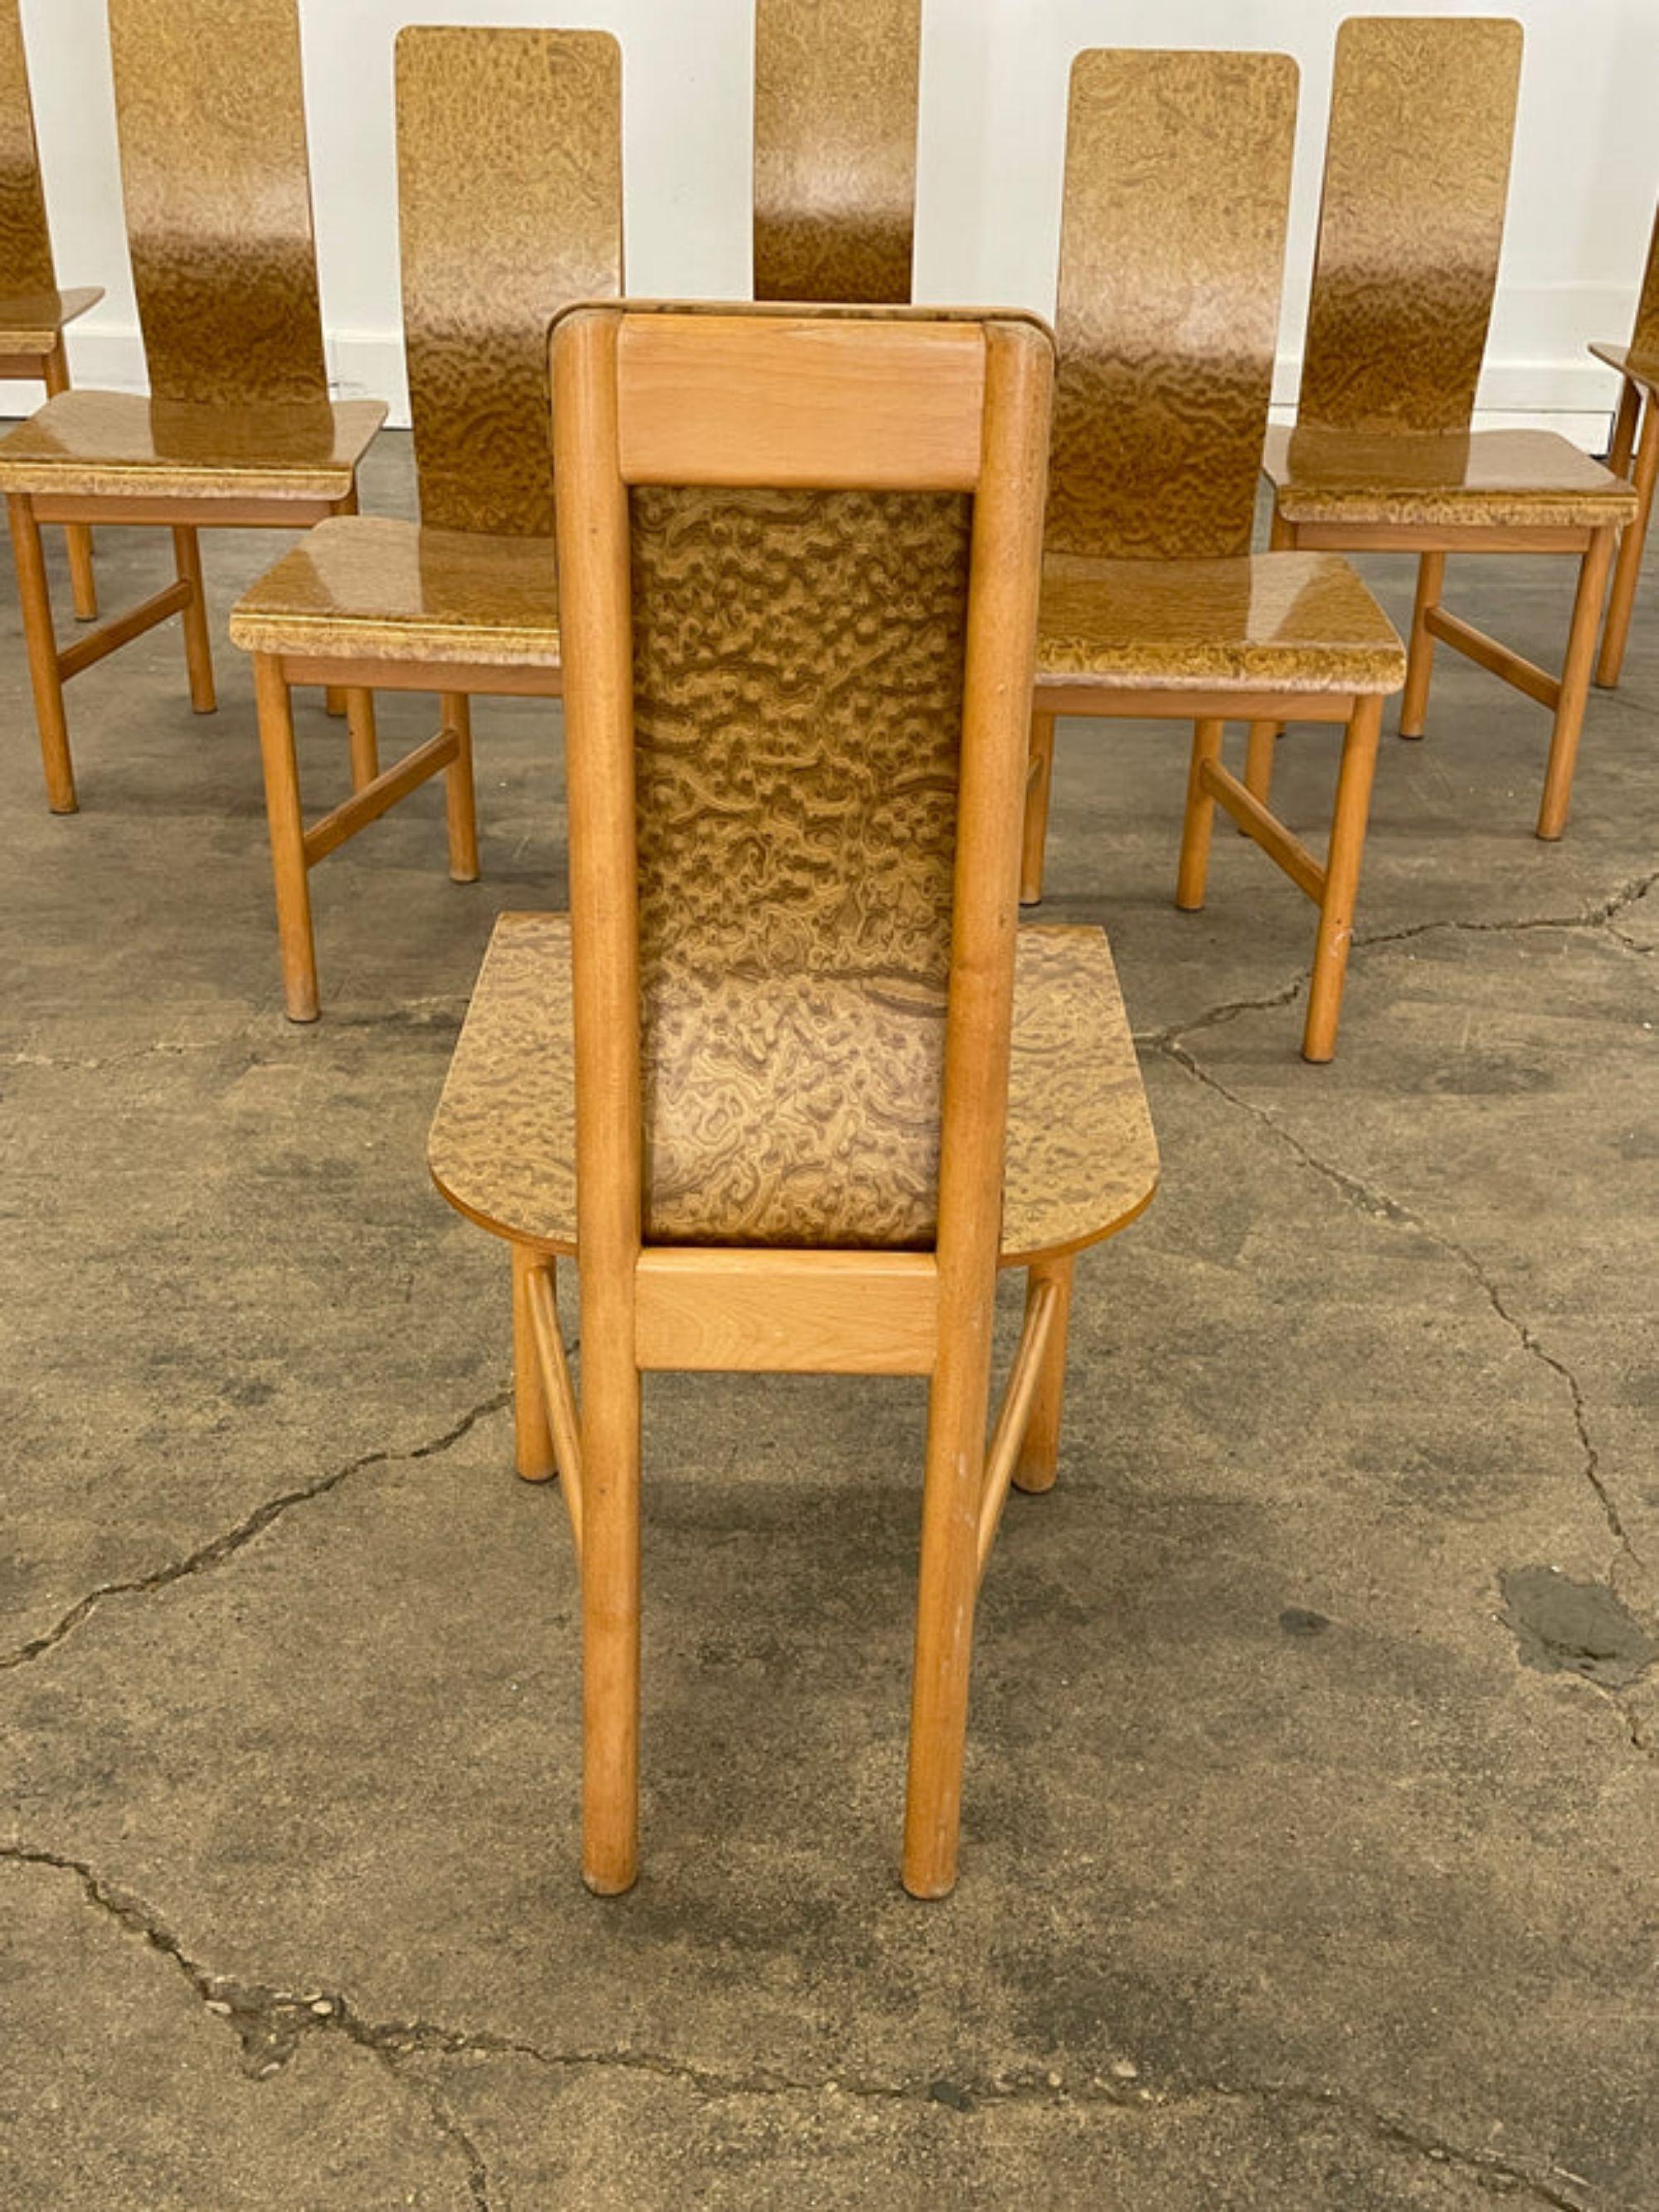 Molded Set of 8 “Vela” Dining Chairs in Burlwood by Enzo Mari, Driade, Italy, 1977 For Sale